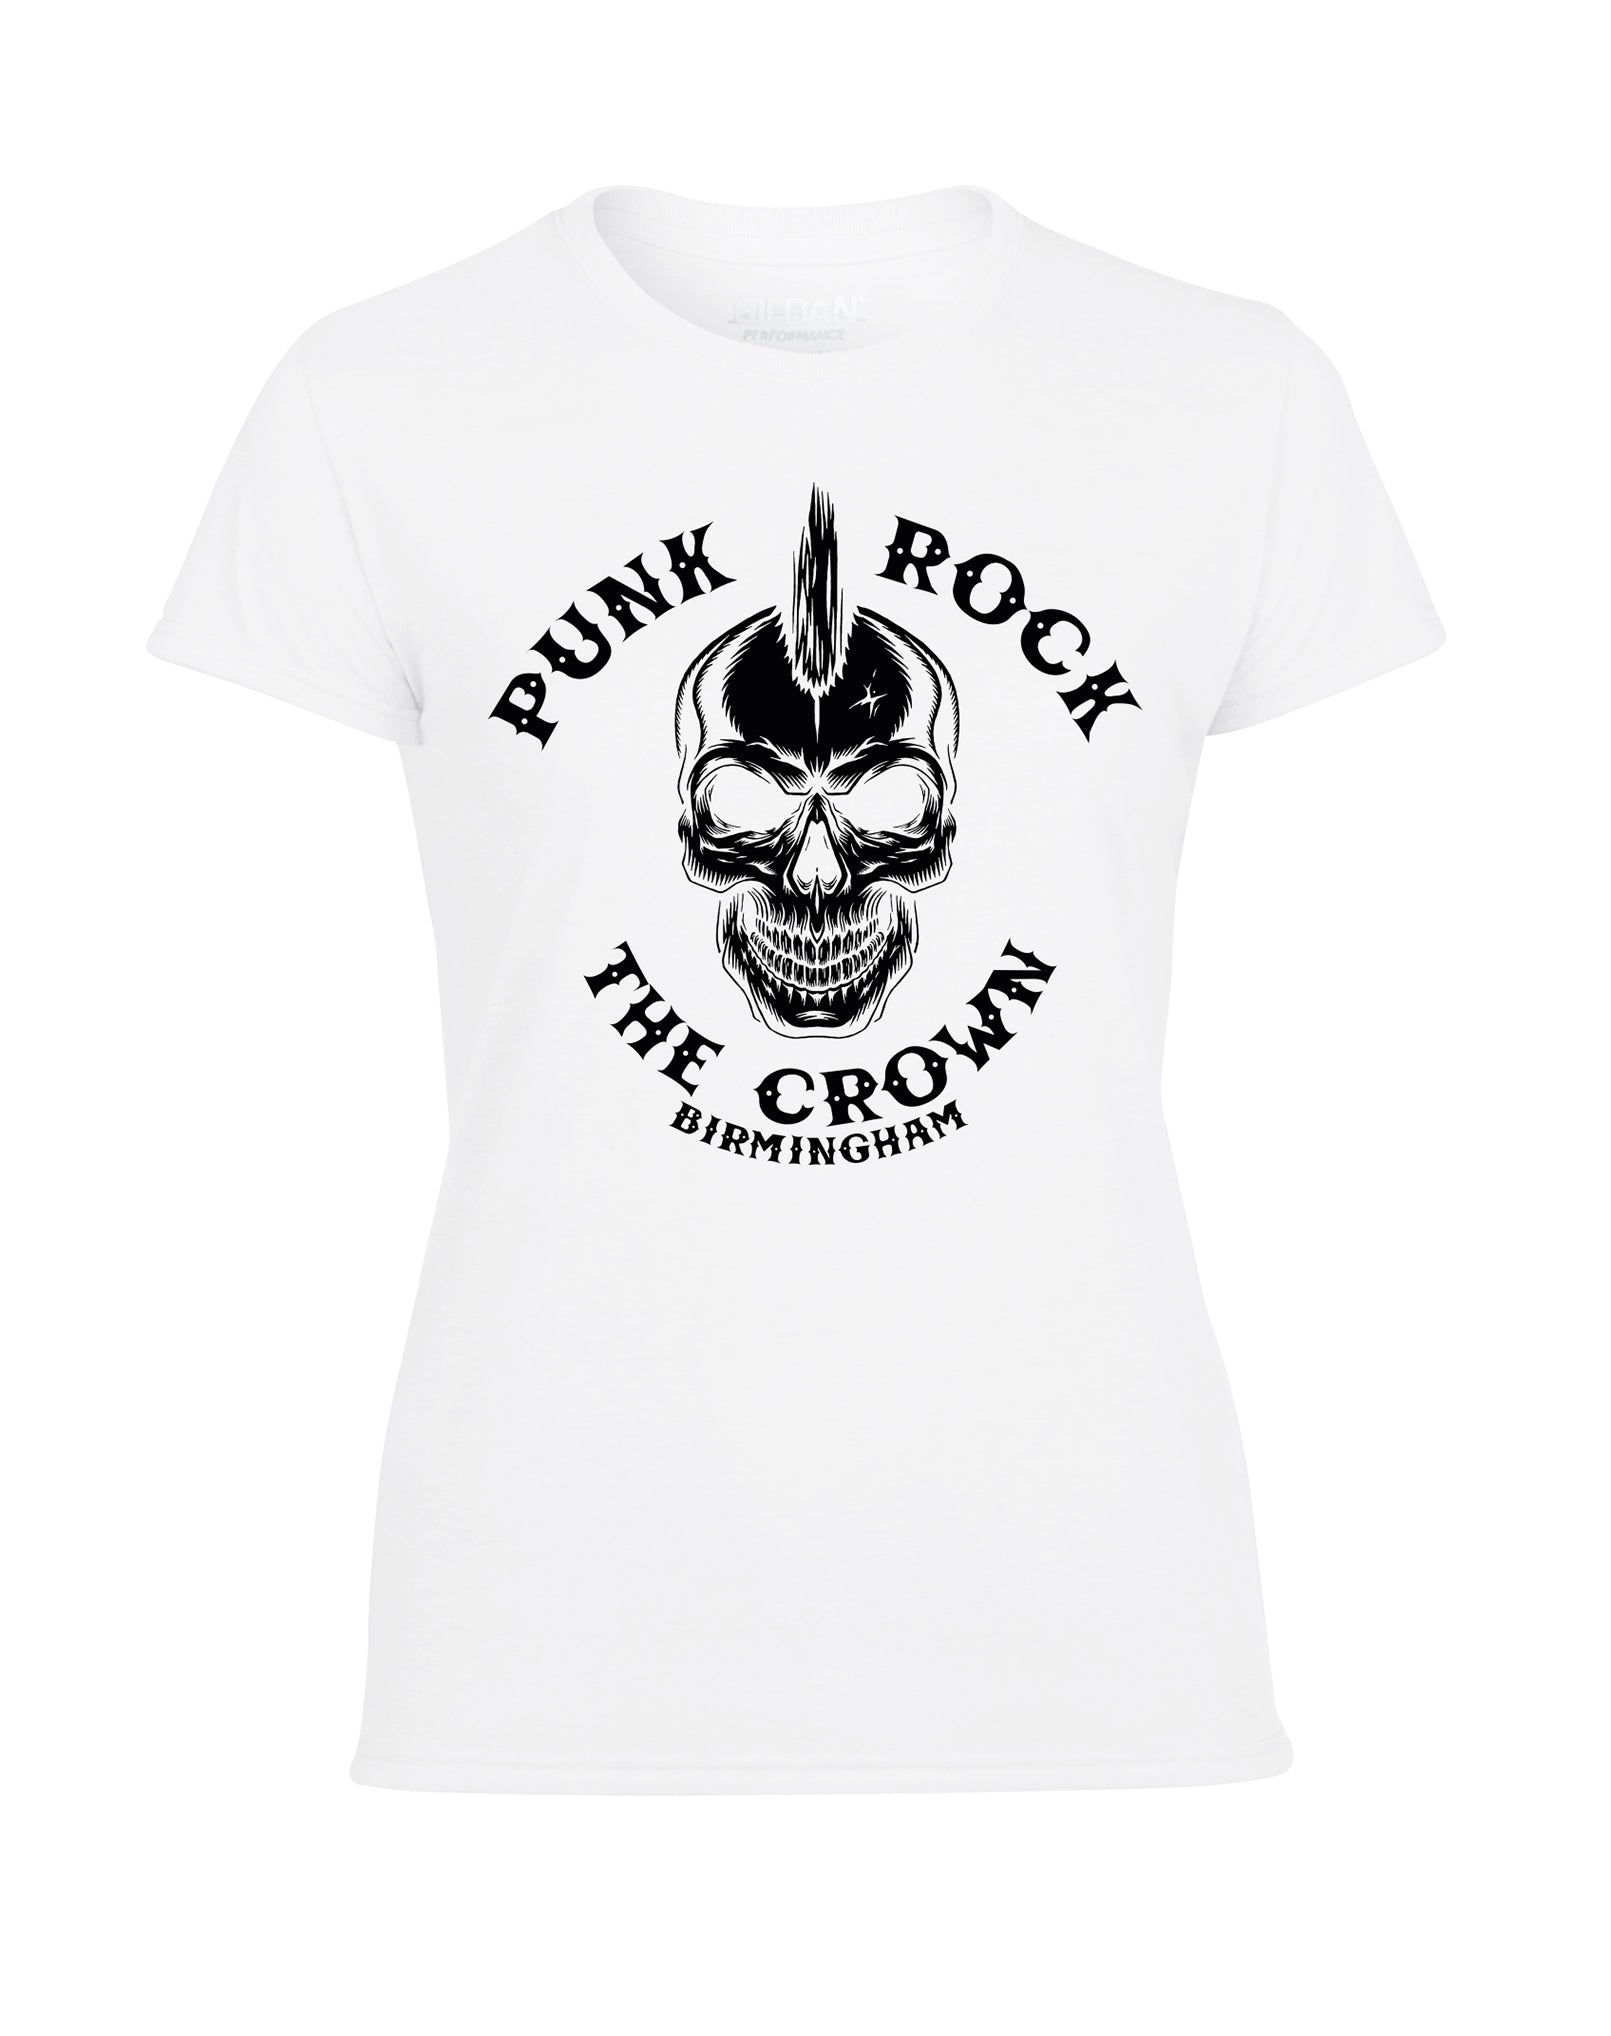 The Crown - punk rock - ladies fit T-shirt - various colours - Dirty Stop Outs